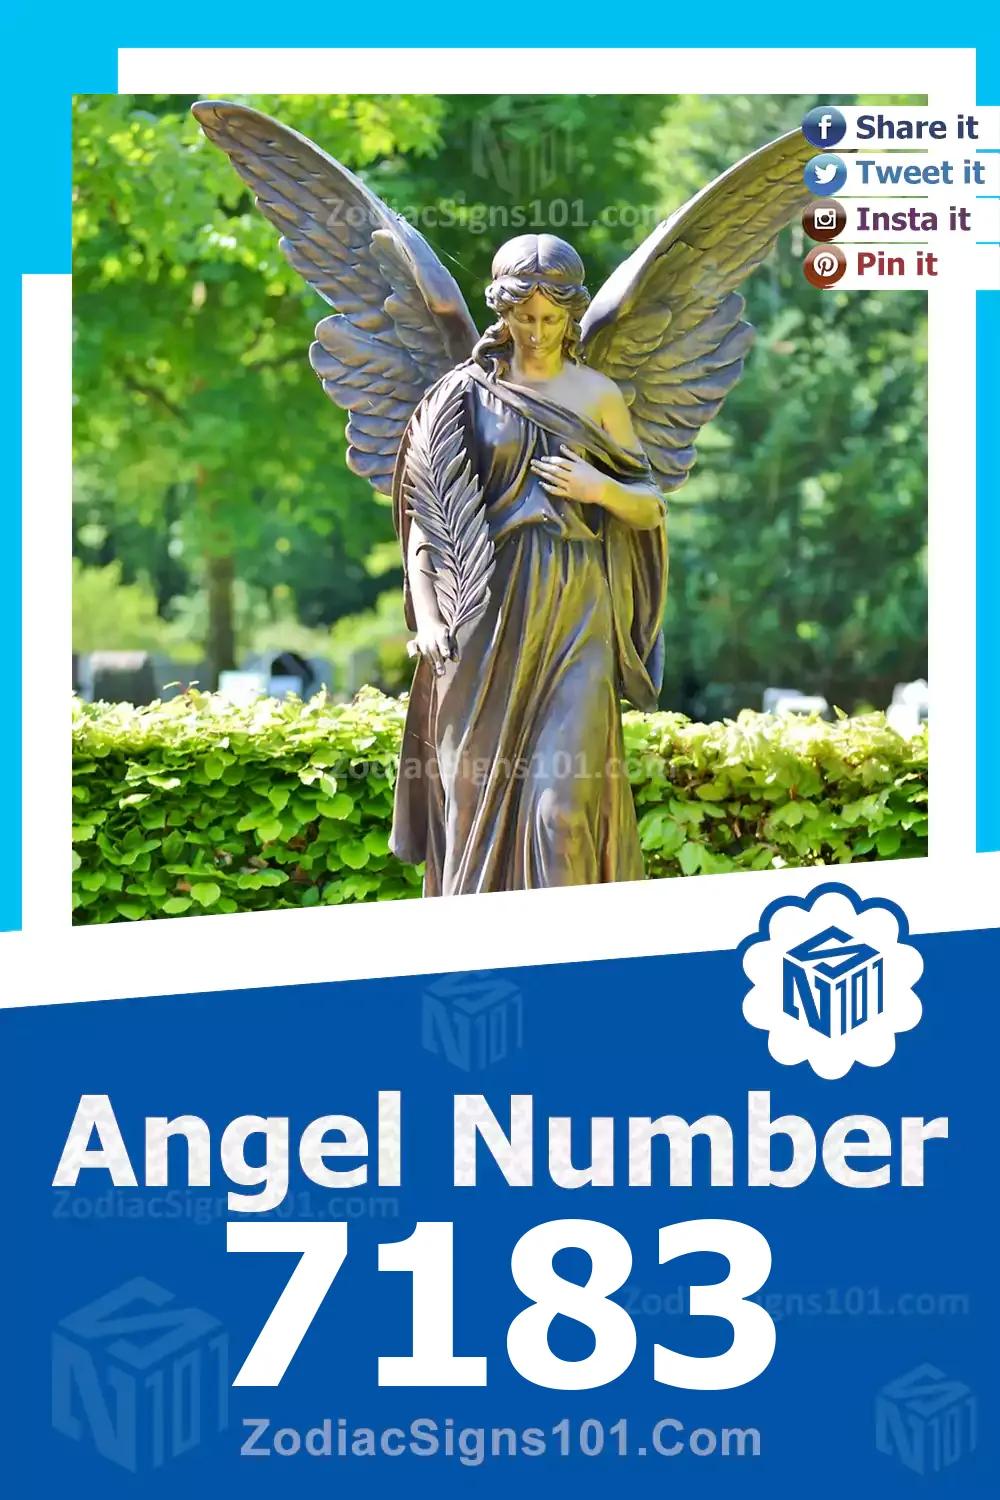 7183 Angel Number Meaning